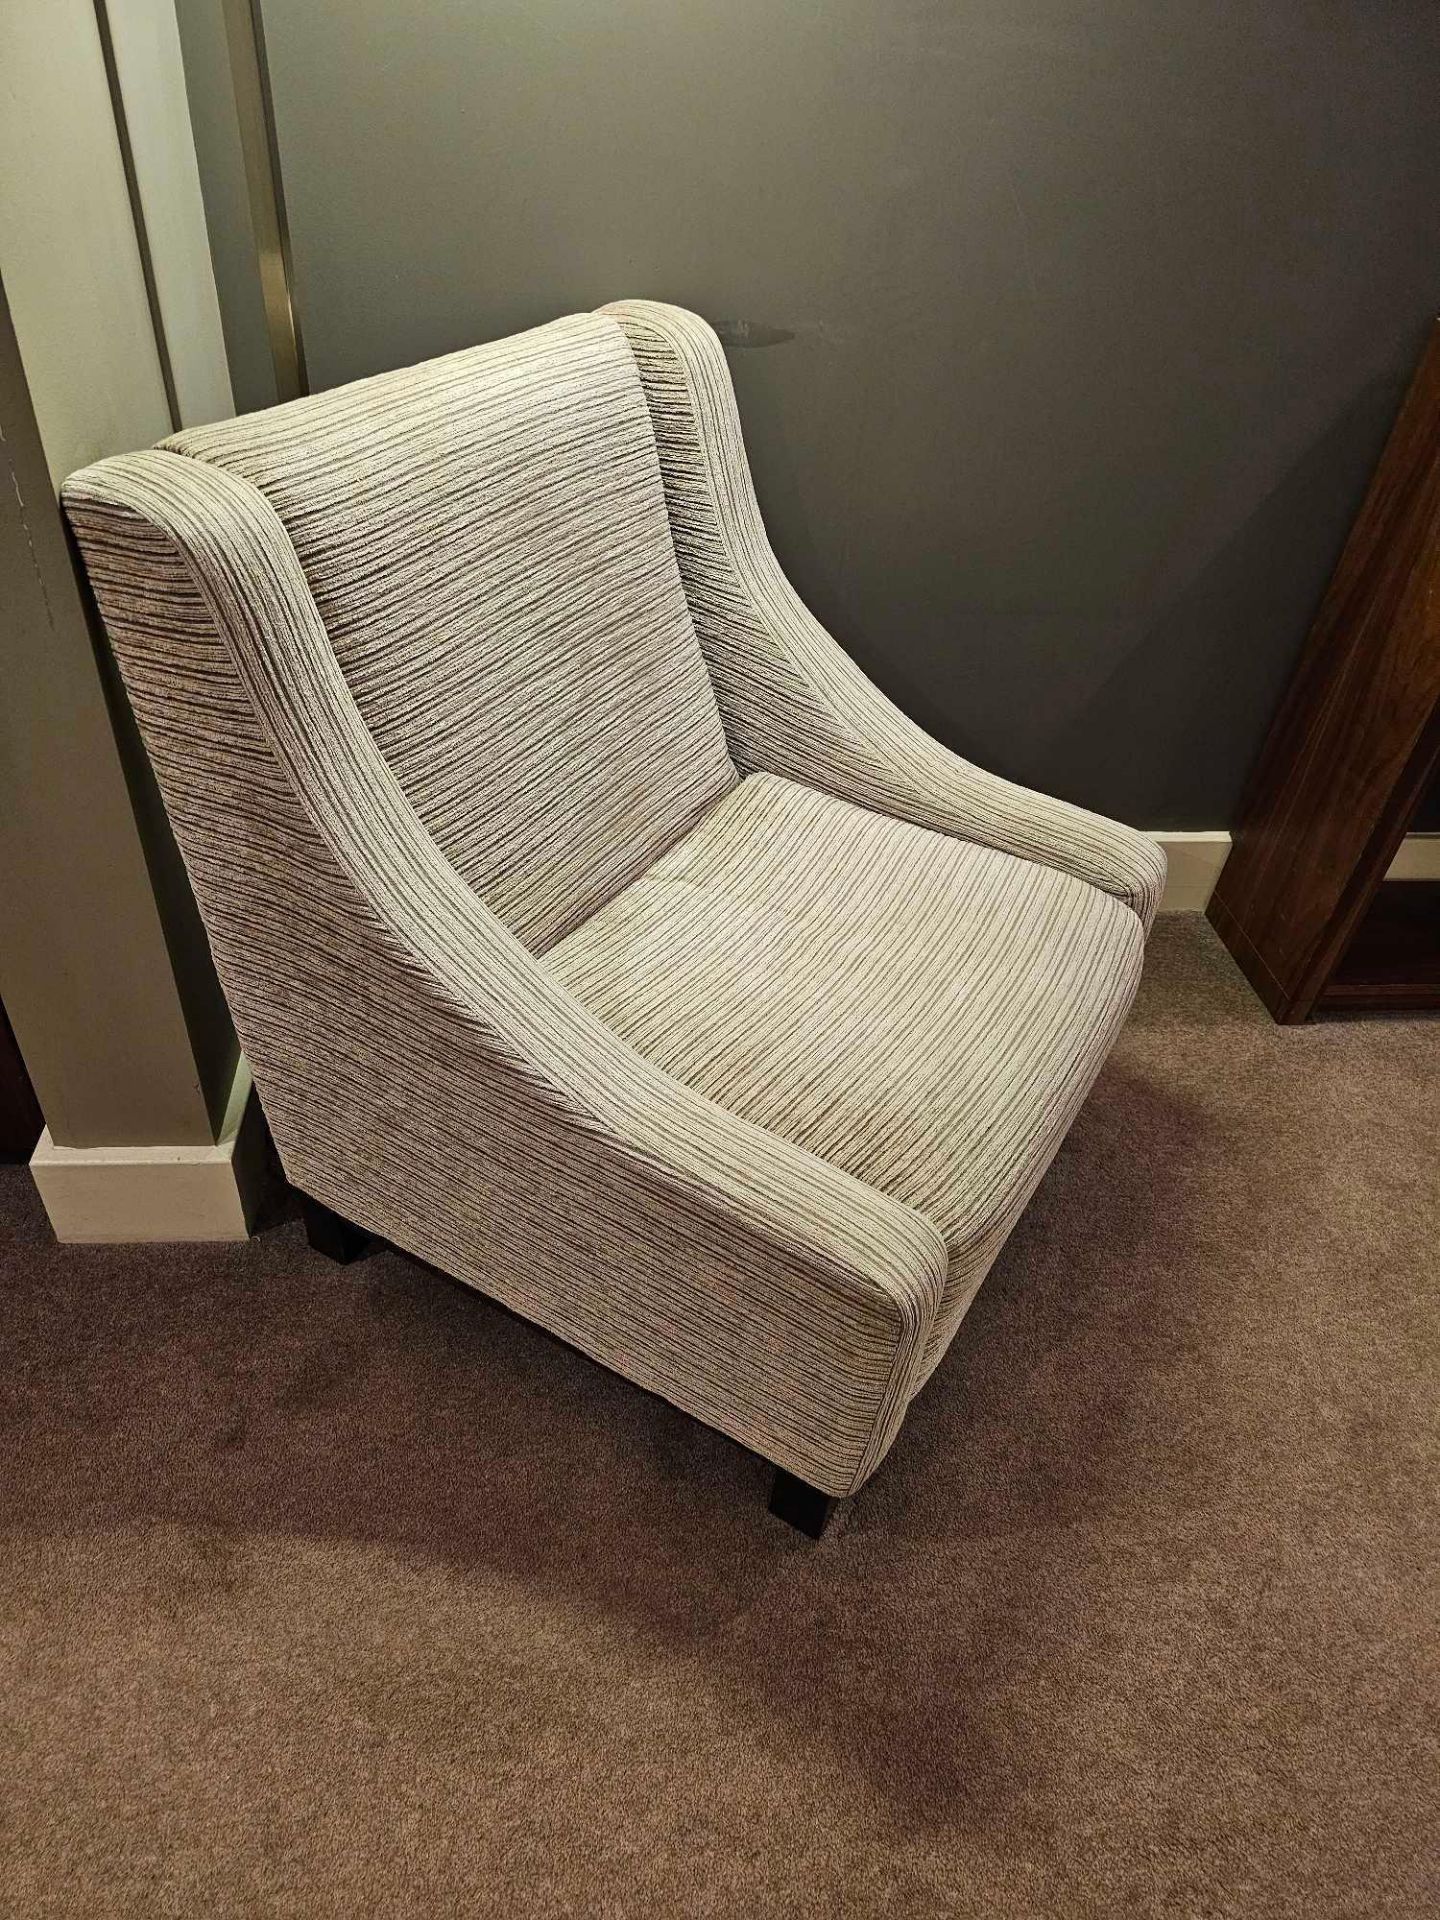 An upholstered relaxer chair 78 x 54 x 86cm ( Location : 212) - Image 2 of 2